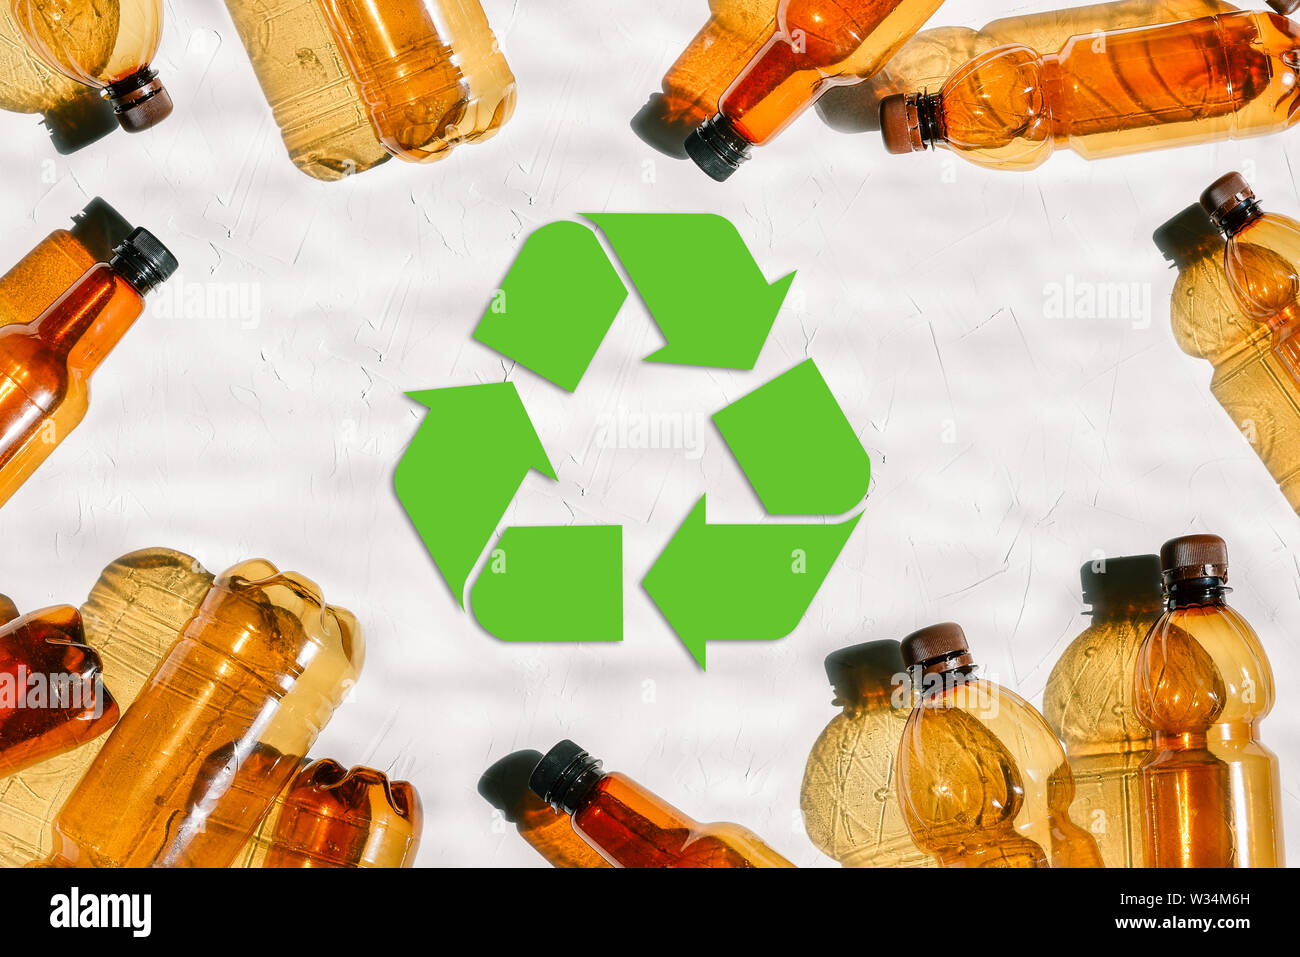 Plastic bottles and reuse mark. Recycling of plastic. Environmental Protection. Green recycle symbol. Environmental problems Stock Photo